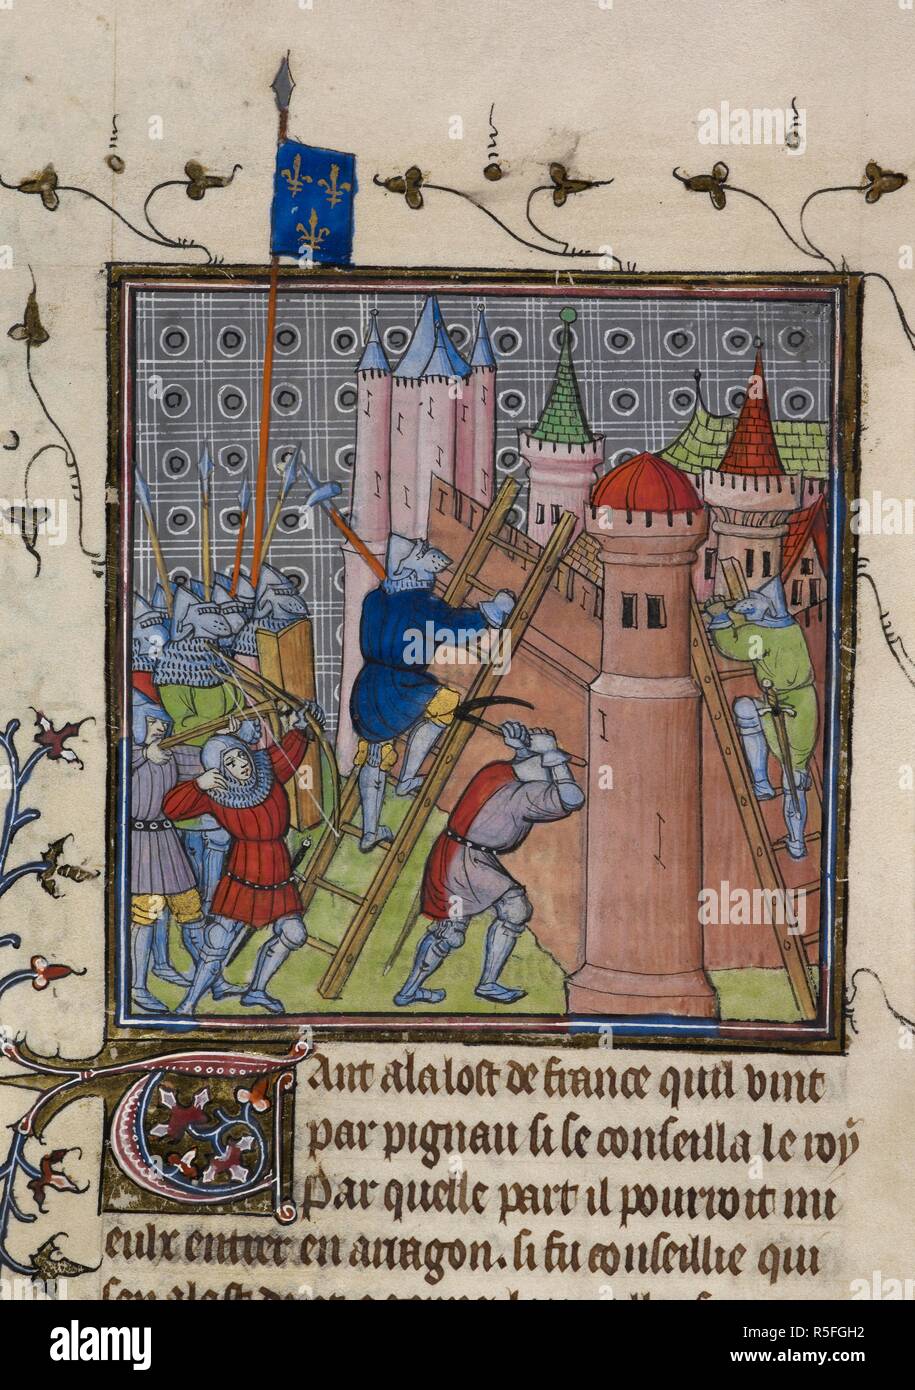 French destroy Genoa. Chroniques de France ou de St. Denis. End of 14th century. (Miniature) The French destroy Genoa; soldiers shown scaling the walls, firing crossbows and wielding a pick-axe.  Image taken from Chroniques de France ou de St. Denis.  Originally published/produced in End of 14th century. . Source: Royal 20 C. VII, f.19. Language: French. Stock Photo